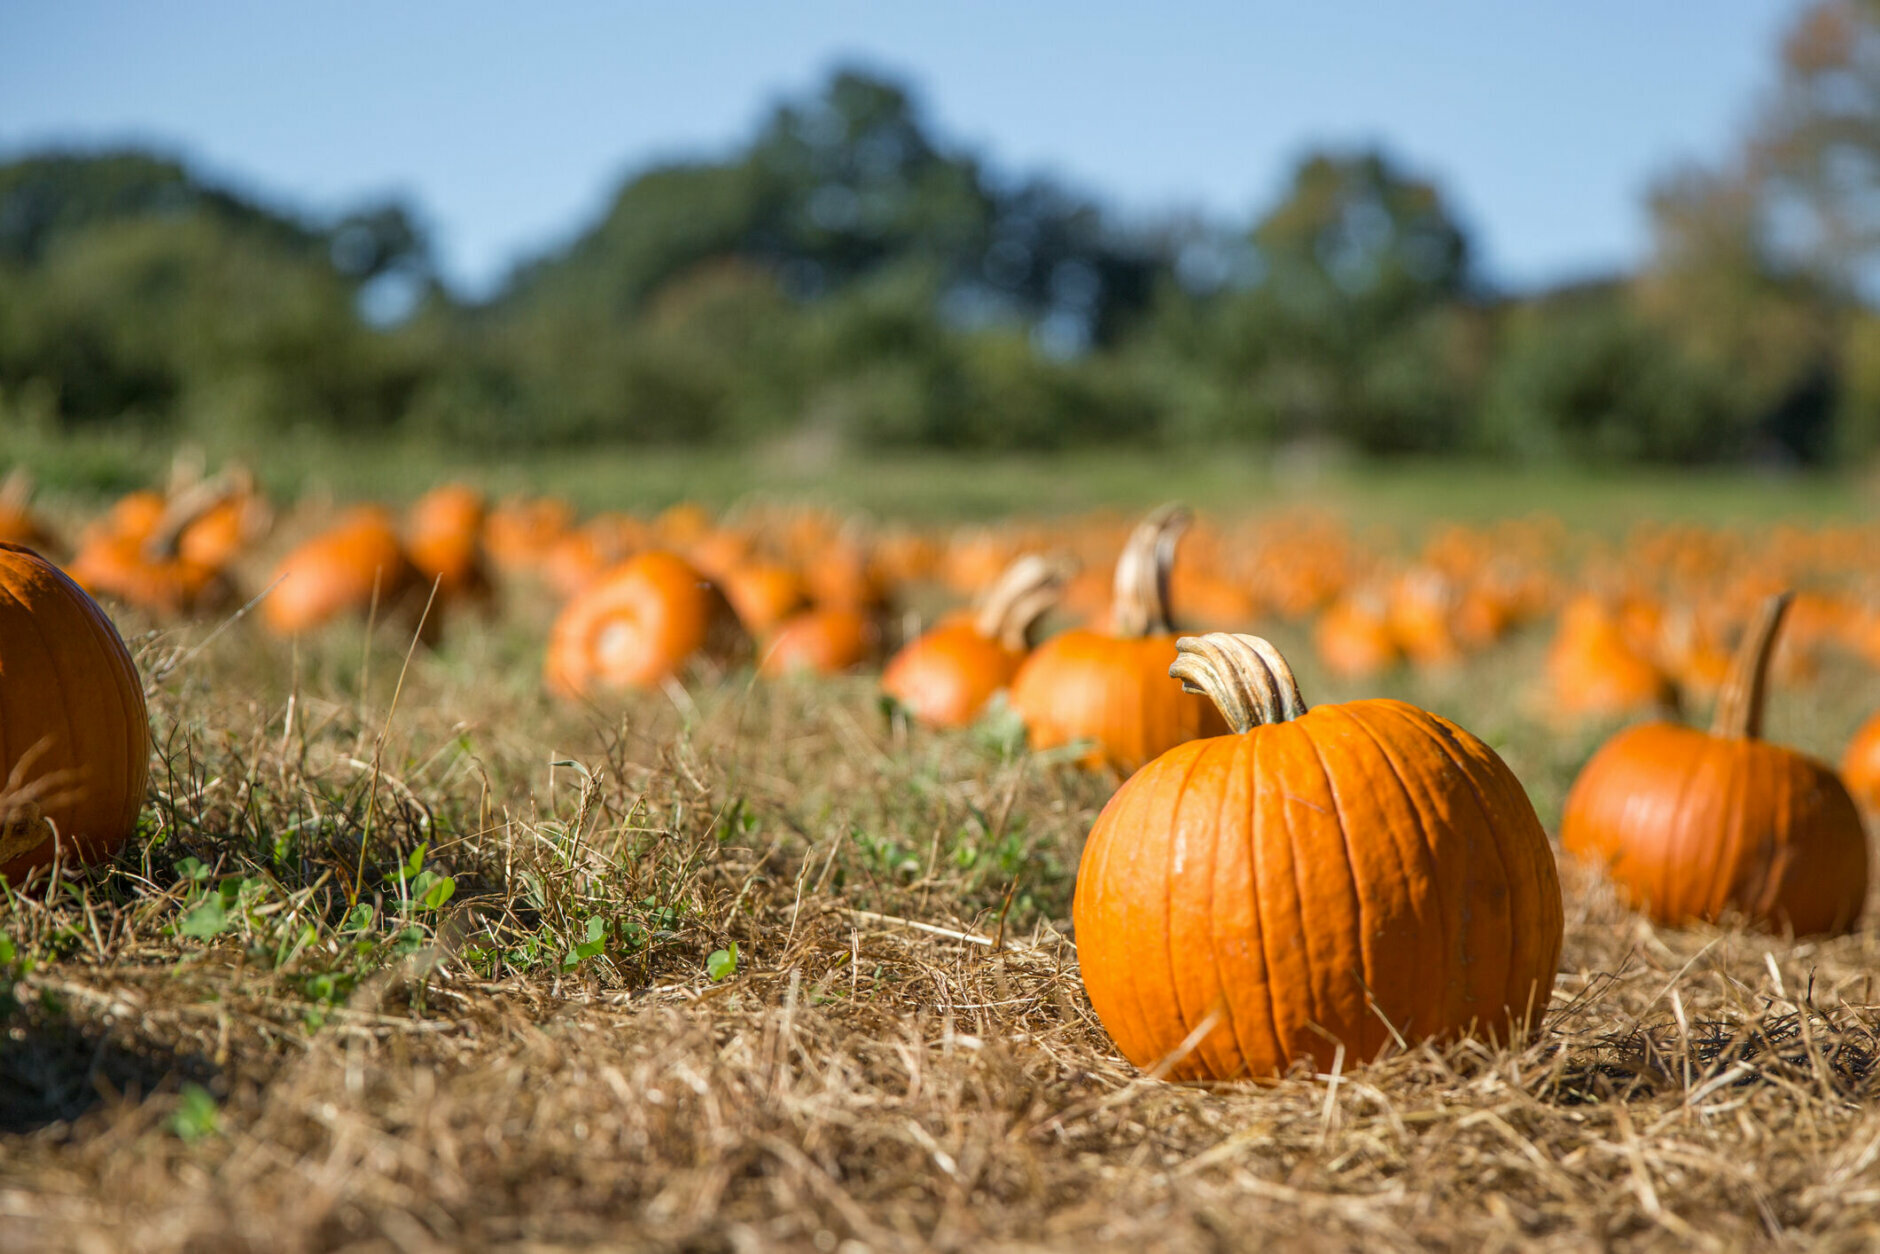 <p><a href="https://greatcountryfarms.com/festivals-events/fall-pumpkin-harvest-festival/" target="_blank" rel="noopener">Great County Farms</a> in Loudoun County, Virginia, features their fall festival from Oct. 1 through Halloween. They have pumpkin picking, a corn maze, marshmallow roasting over a bonfire and more. There are also cider doughnuts for those looking for a taste of fall.</p>
<p>They&#8217;ve been holding their fall fest for more than 25 years.</p>
<p>&#8220;We&#8217;ve grown quite a bit and we&#8217;re able to offer more and more to our guests,&#8221; Andrew Taylor, general manager of the farm, told WTOP. &#8220;We now have a full day experience here. Everything from pumpkin picking, to the corn maze, to a 12-acre play area for the whole family to come out and enjoy the whole day at the farm.&#8221;</p>
<p>Taylor says one of the popular attractions over the last five years or so is a pumpkin-eating dinosaur named &#8220;P-Rex.&#8221;</p>
<p>There&#8217;s also a winery and brewery on the property for some adult fun afterwards.</p>
<p>When it comes to COVID-19 and safety, Taylor encouraged visitors to buy tickets ahead of time. He said there&#8217;s plenty of space for social distancing on the 500-acre farm.</p>
<p>&#8220;We just have so much space for people to spread out. We have a 15-acre play area. We have a large corn maze, and most of the time you&#8217;re really not near people,&#8221; Taylor said. &#8220;We encourage people to come out and get out of the city for the day and enjoy that farm weather.&#8221;</p>
